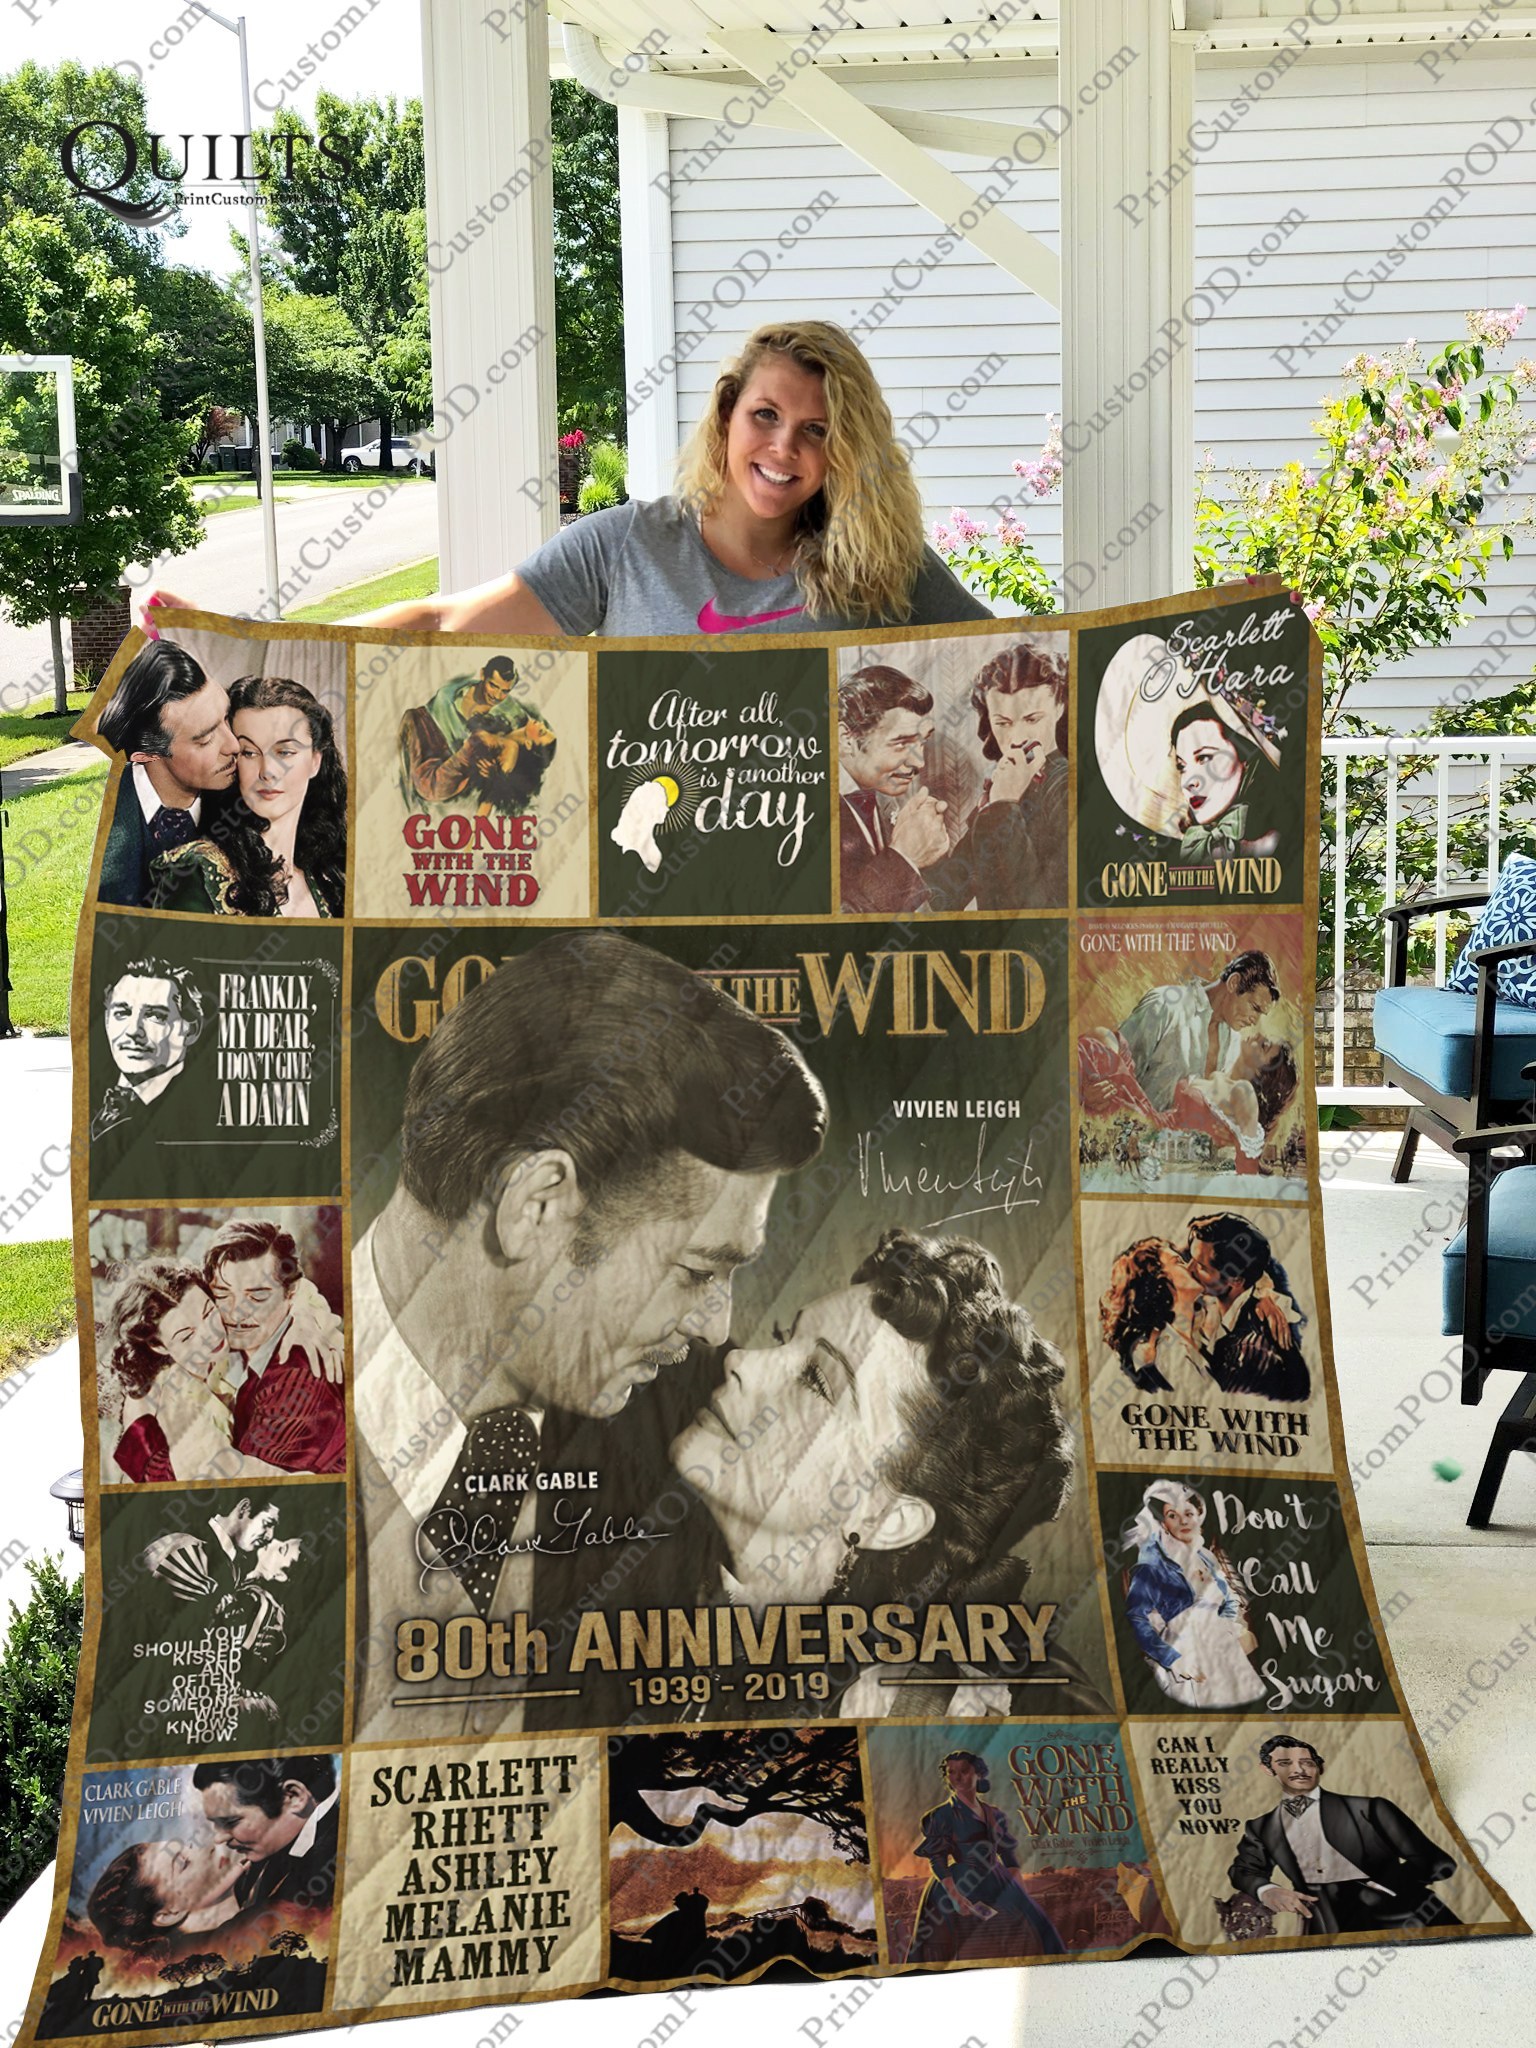 Gone with the wind 80th anniversary quilt 2